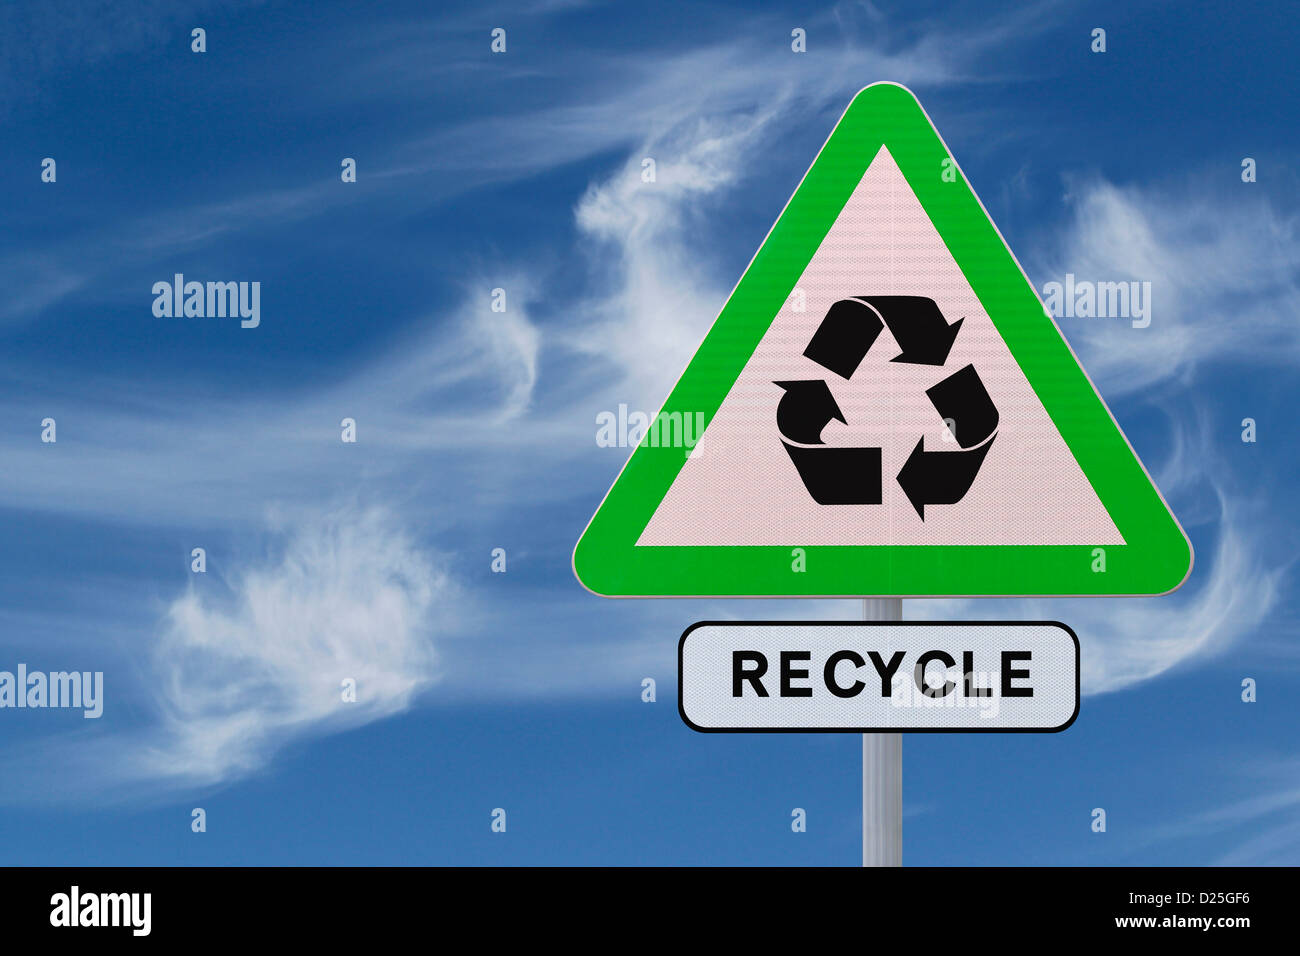 A road sign promoting recycling and environmental awareness Stock Photo